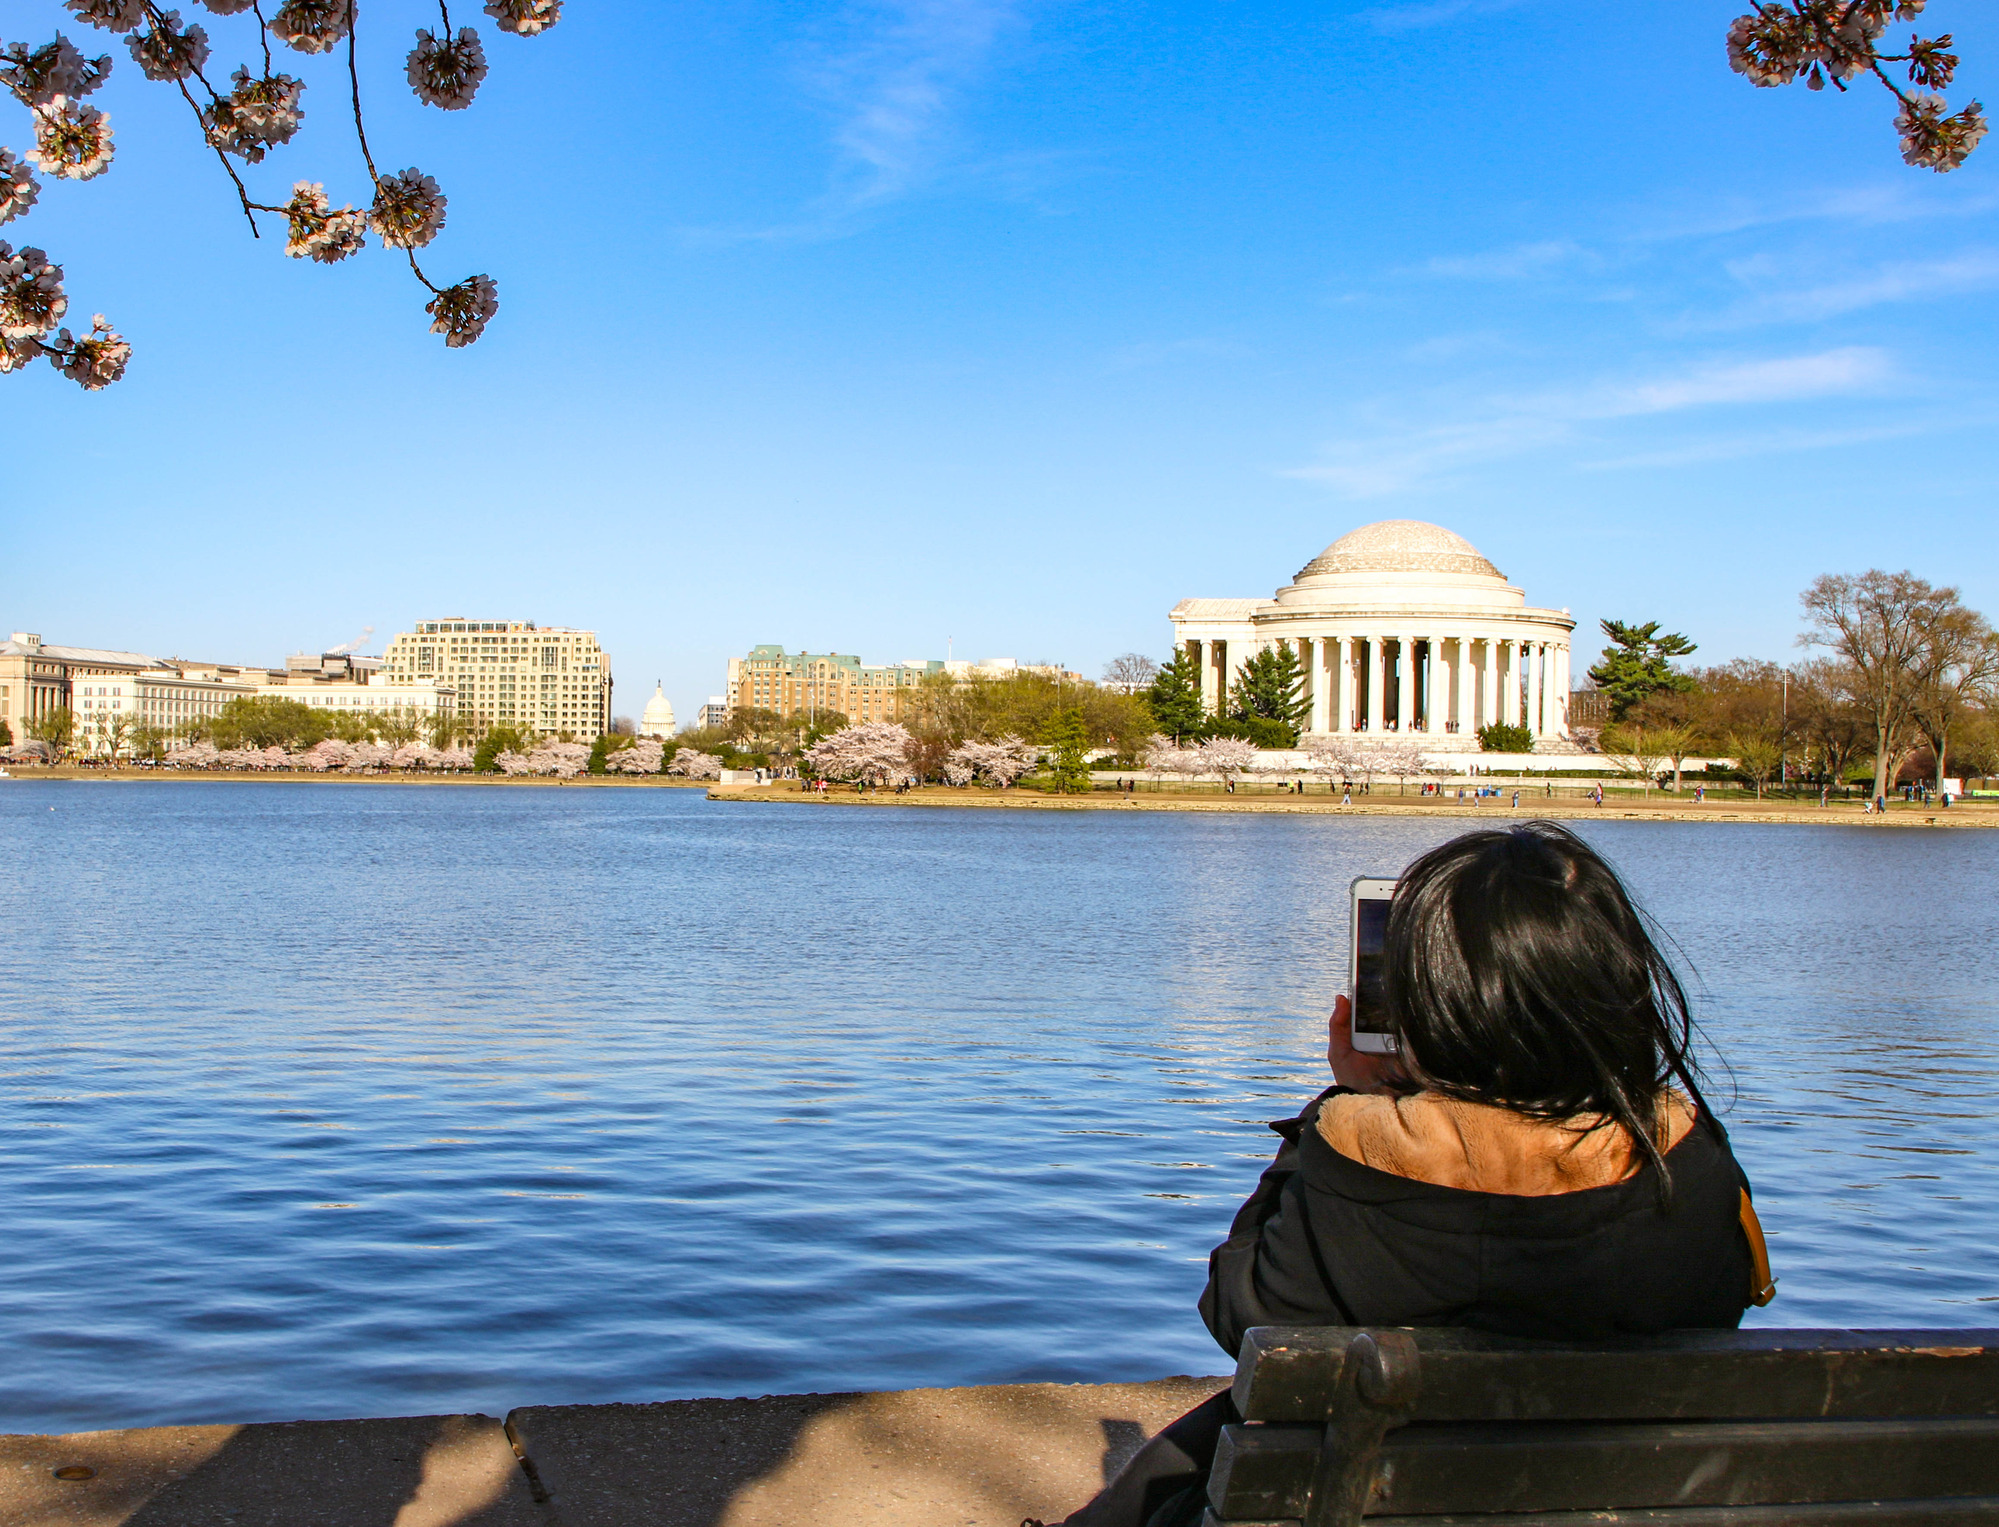 Visitor taking a picture of the Thomas Jefferson Memorial while sitting on a bench